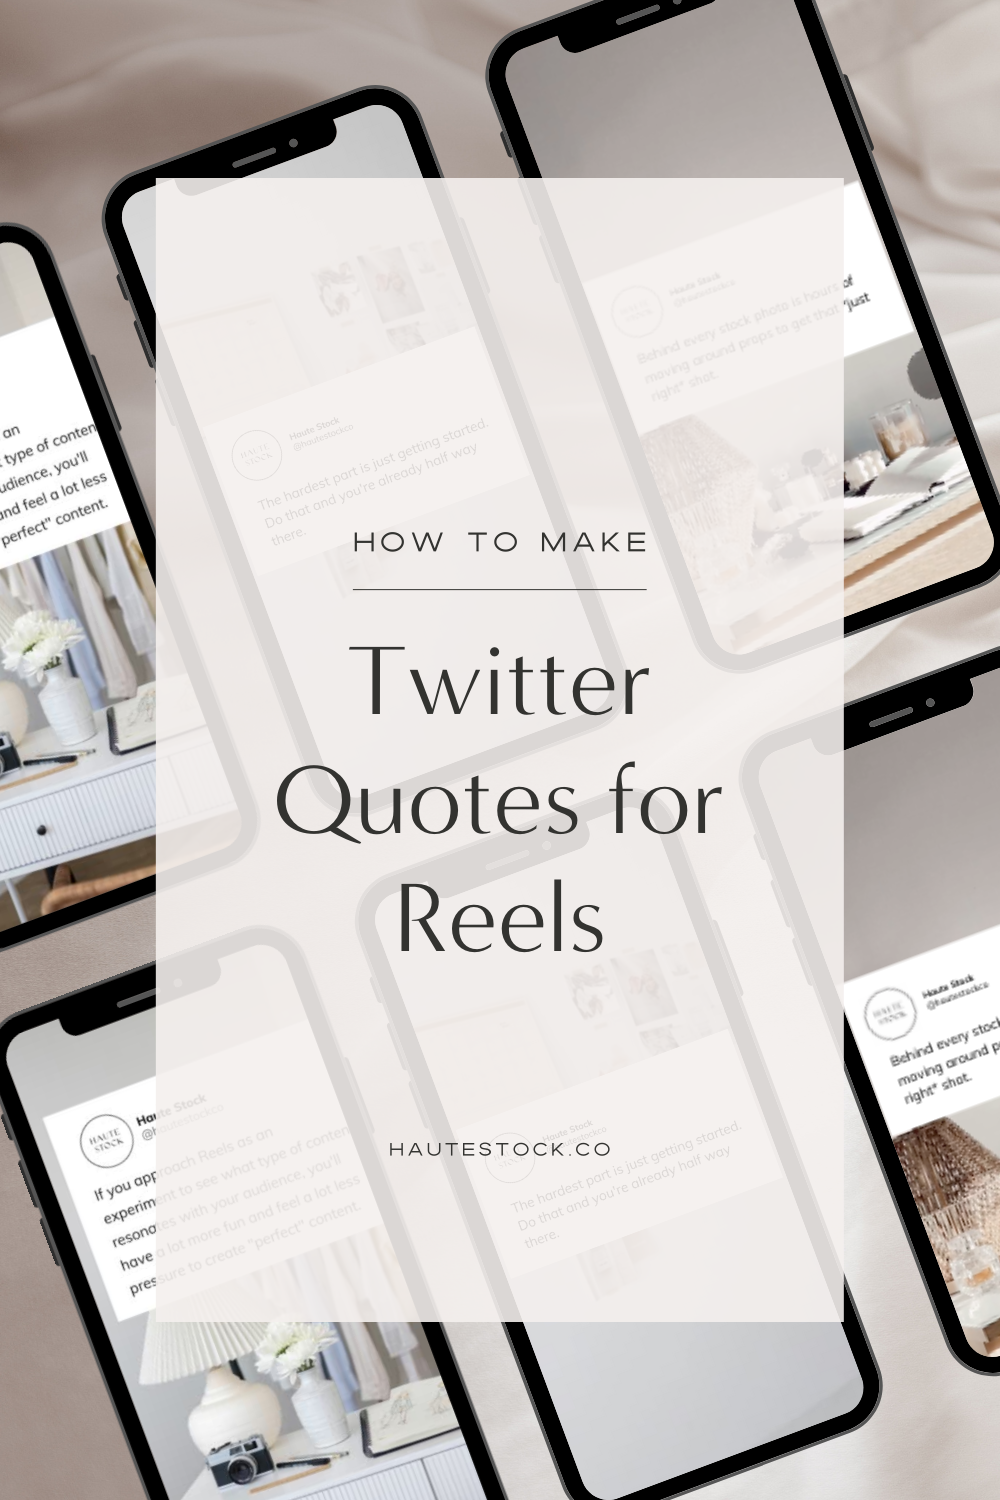 How to Make Twitter Quotes for Reels in Canva